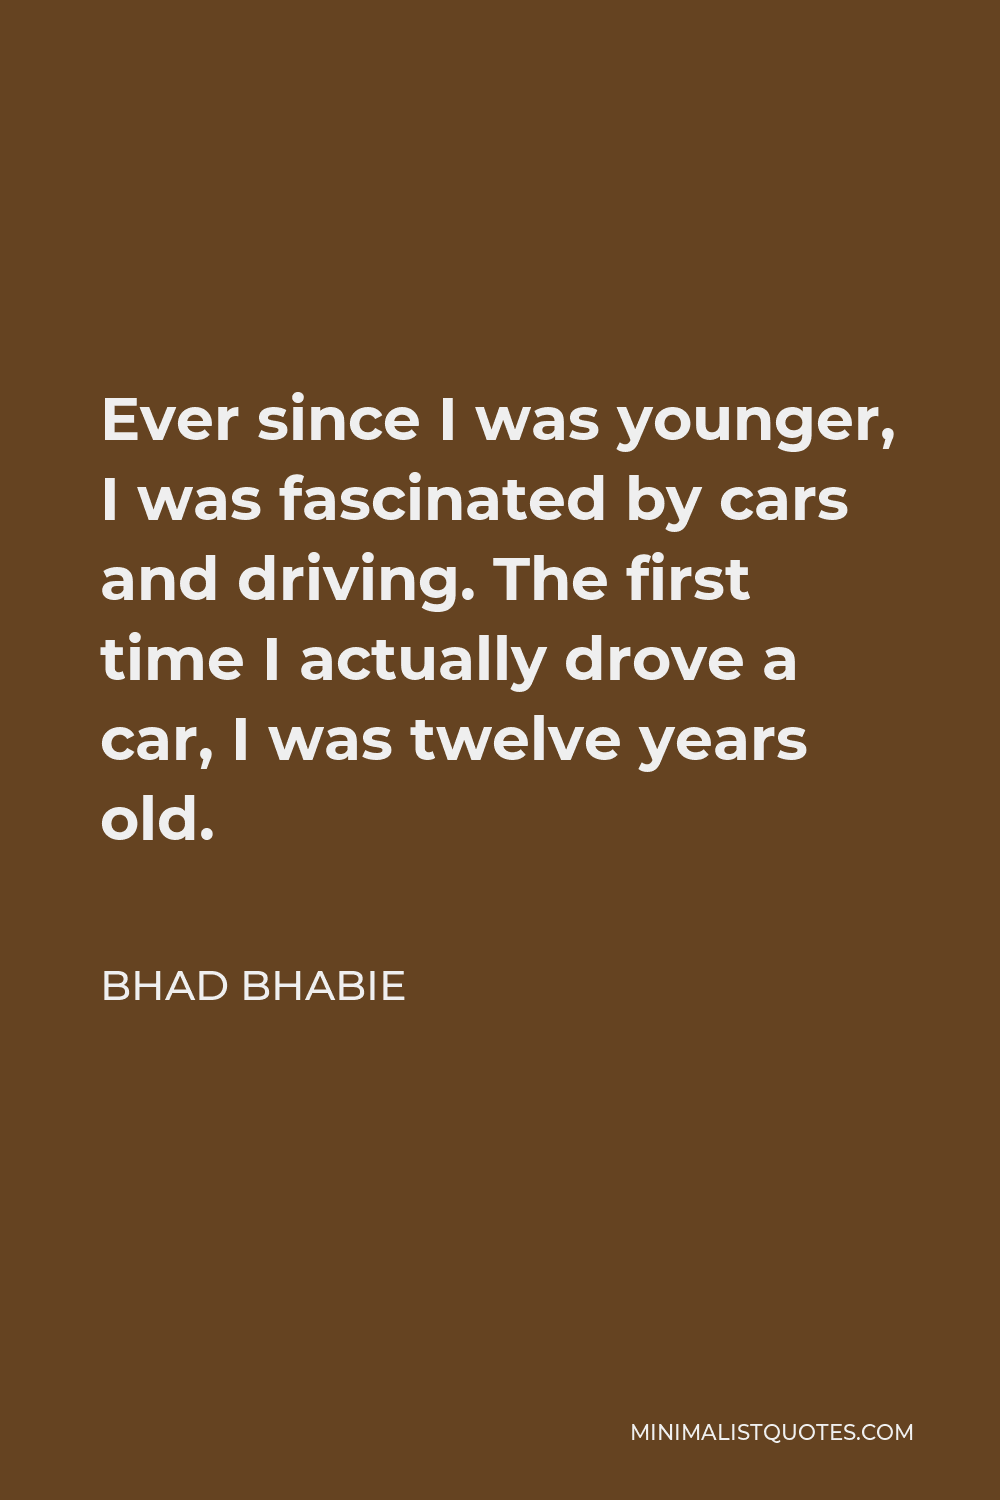 Bhad Bhabie Quote - Ever since I was younger, I was fascinated by cars and driving. The first time I actually drove a car, I was twelve years old.